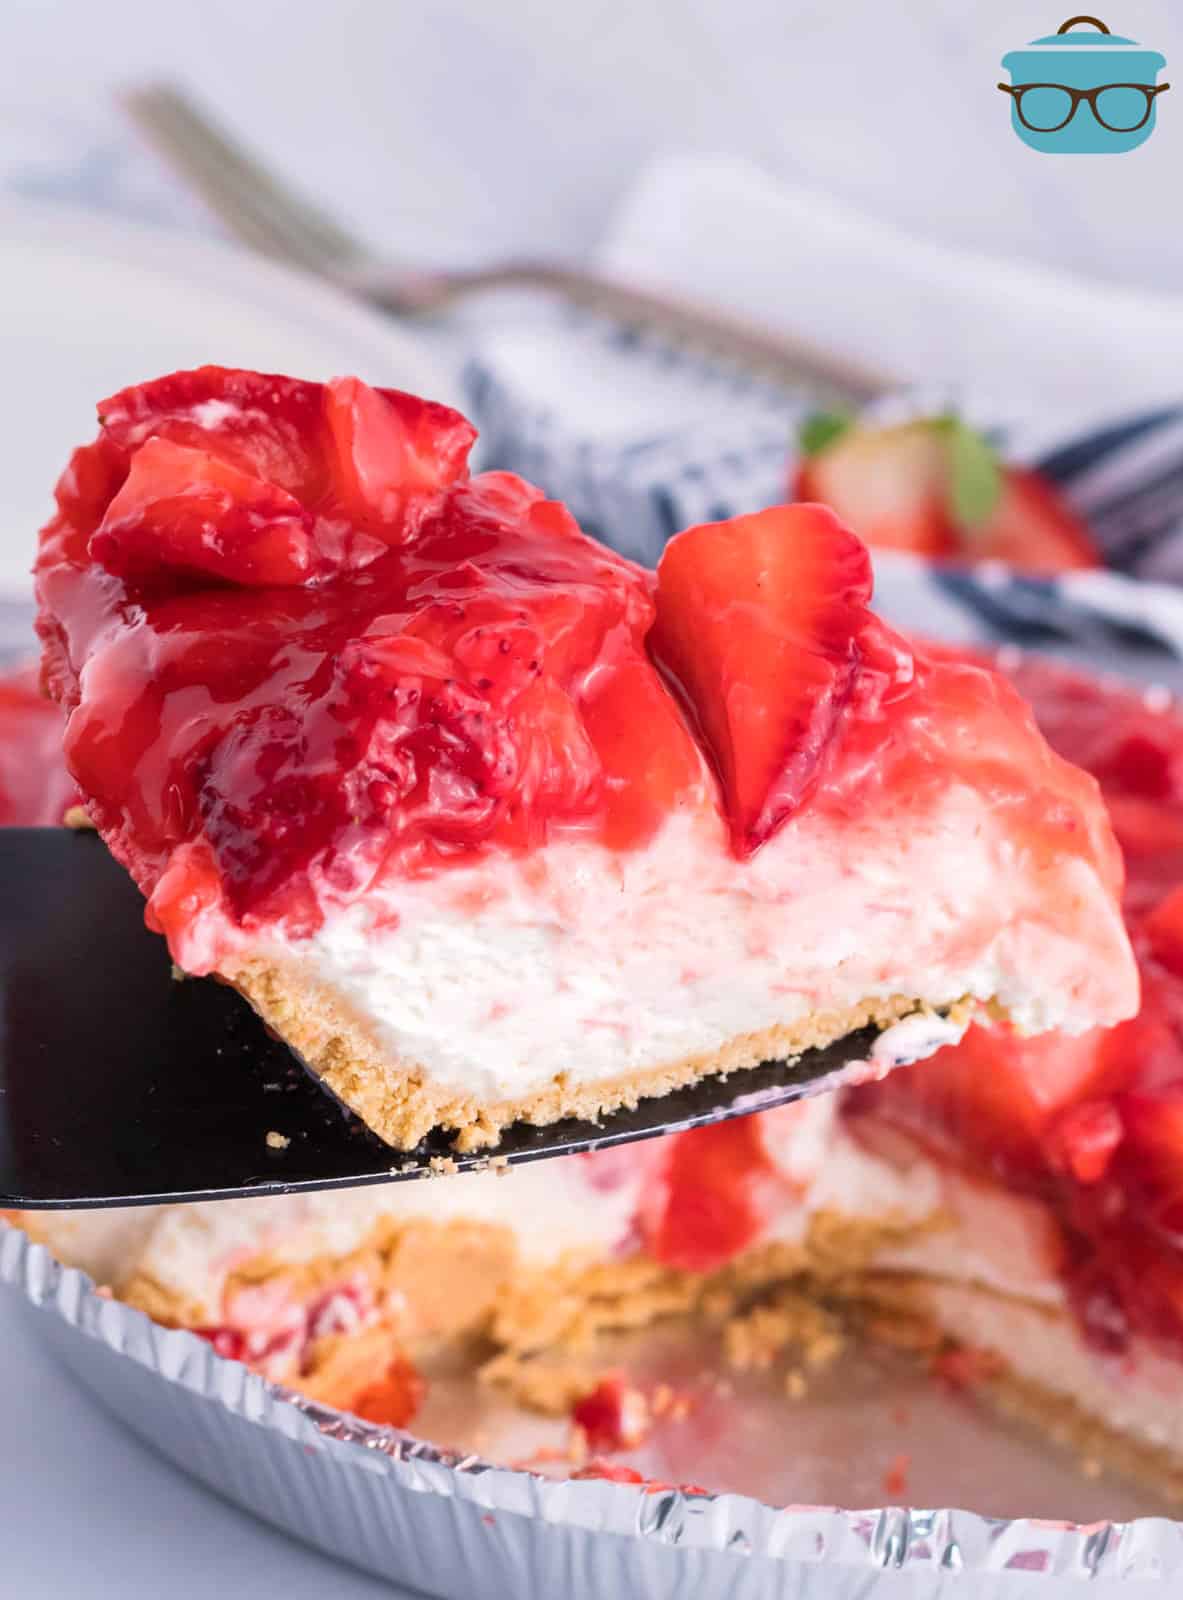 A pie serving utensil with a slice of Strawberry Cream Cheese Pie.